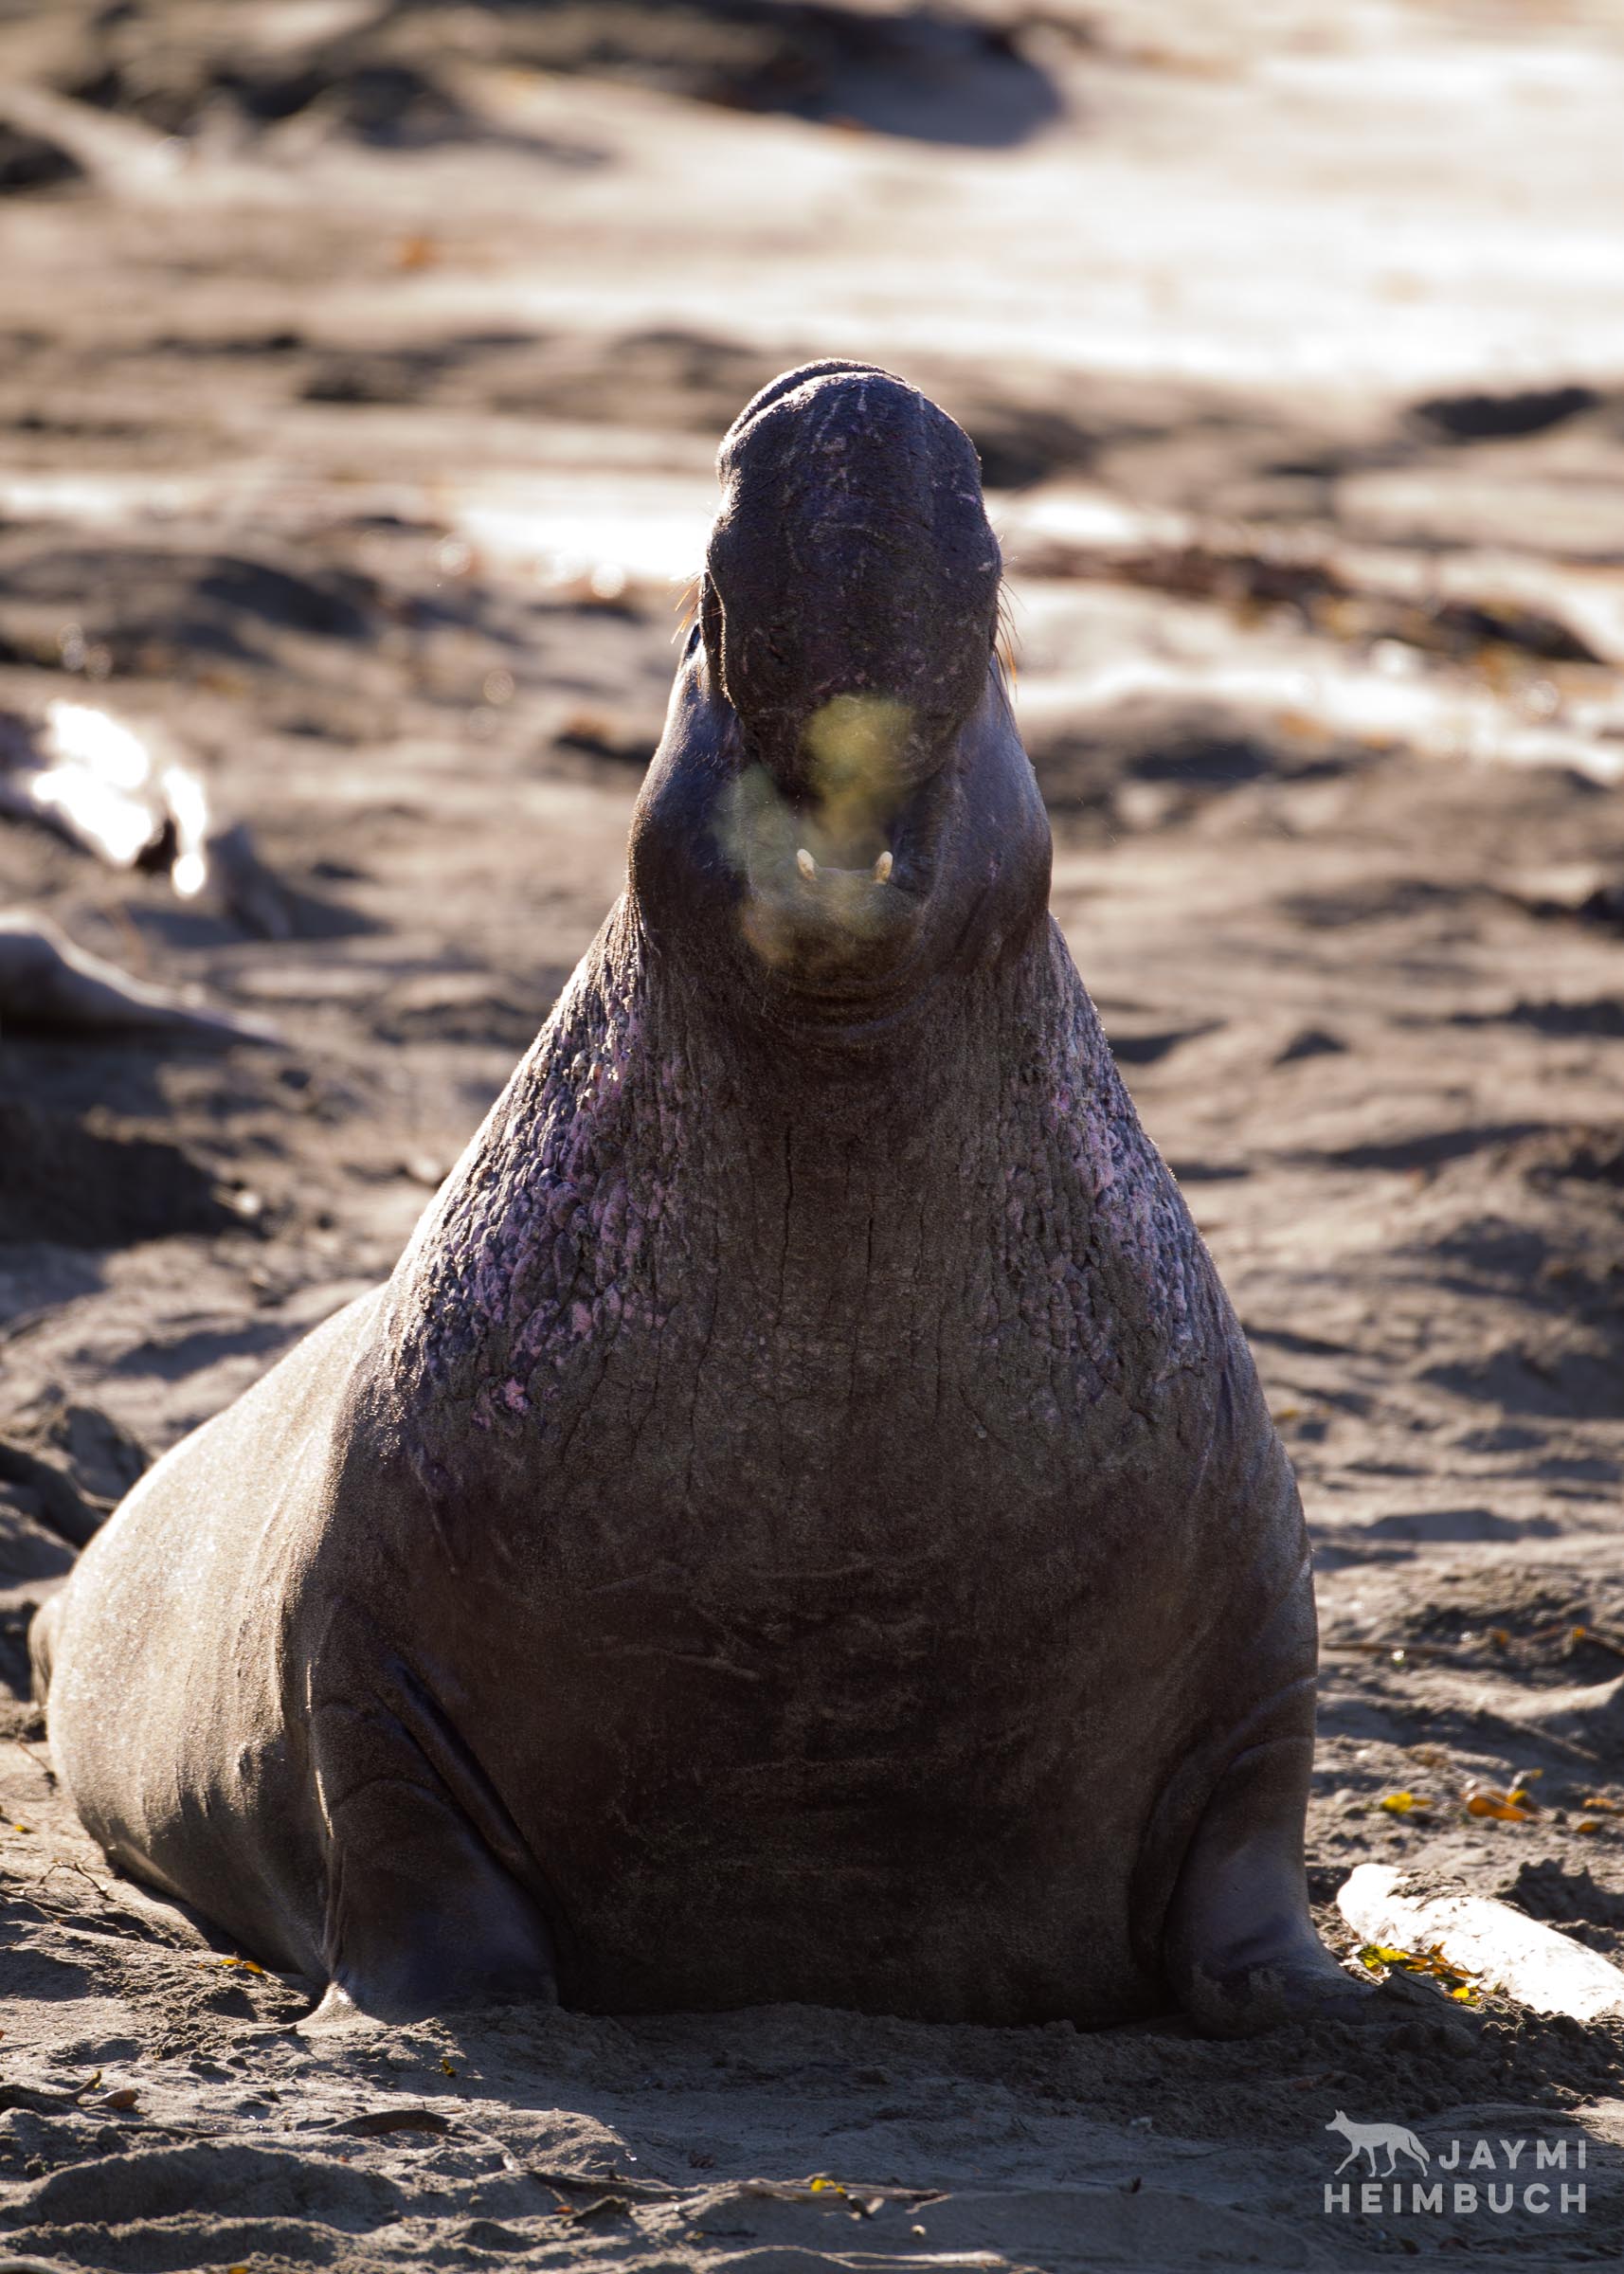 A male northern elephant seal bellows with foggy breath emerging from its mouth